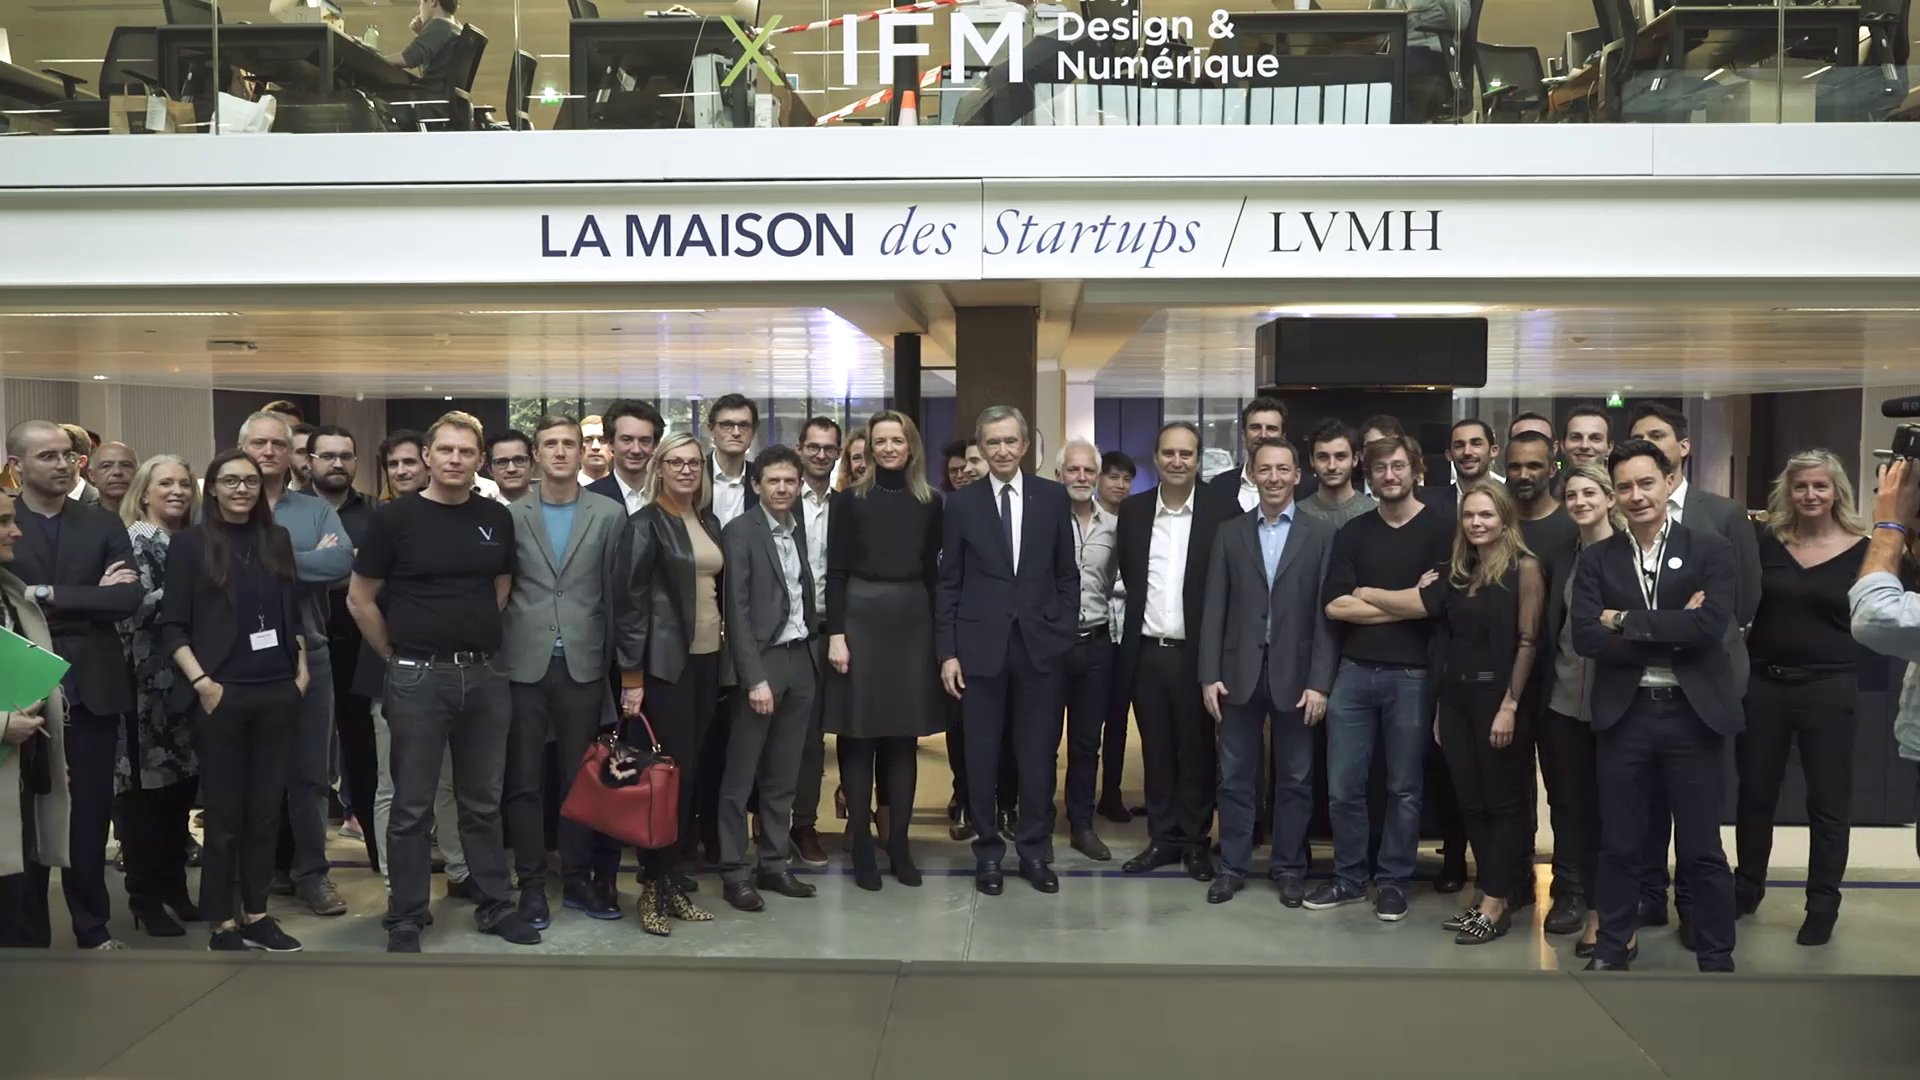 LVMH welcomes the second season of startups at its La Maison des